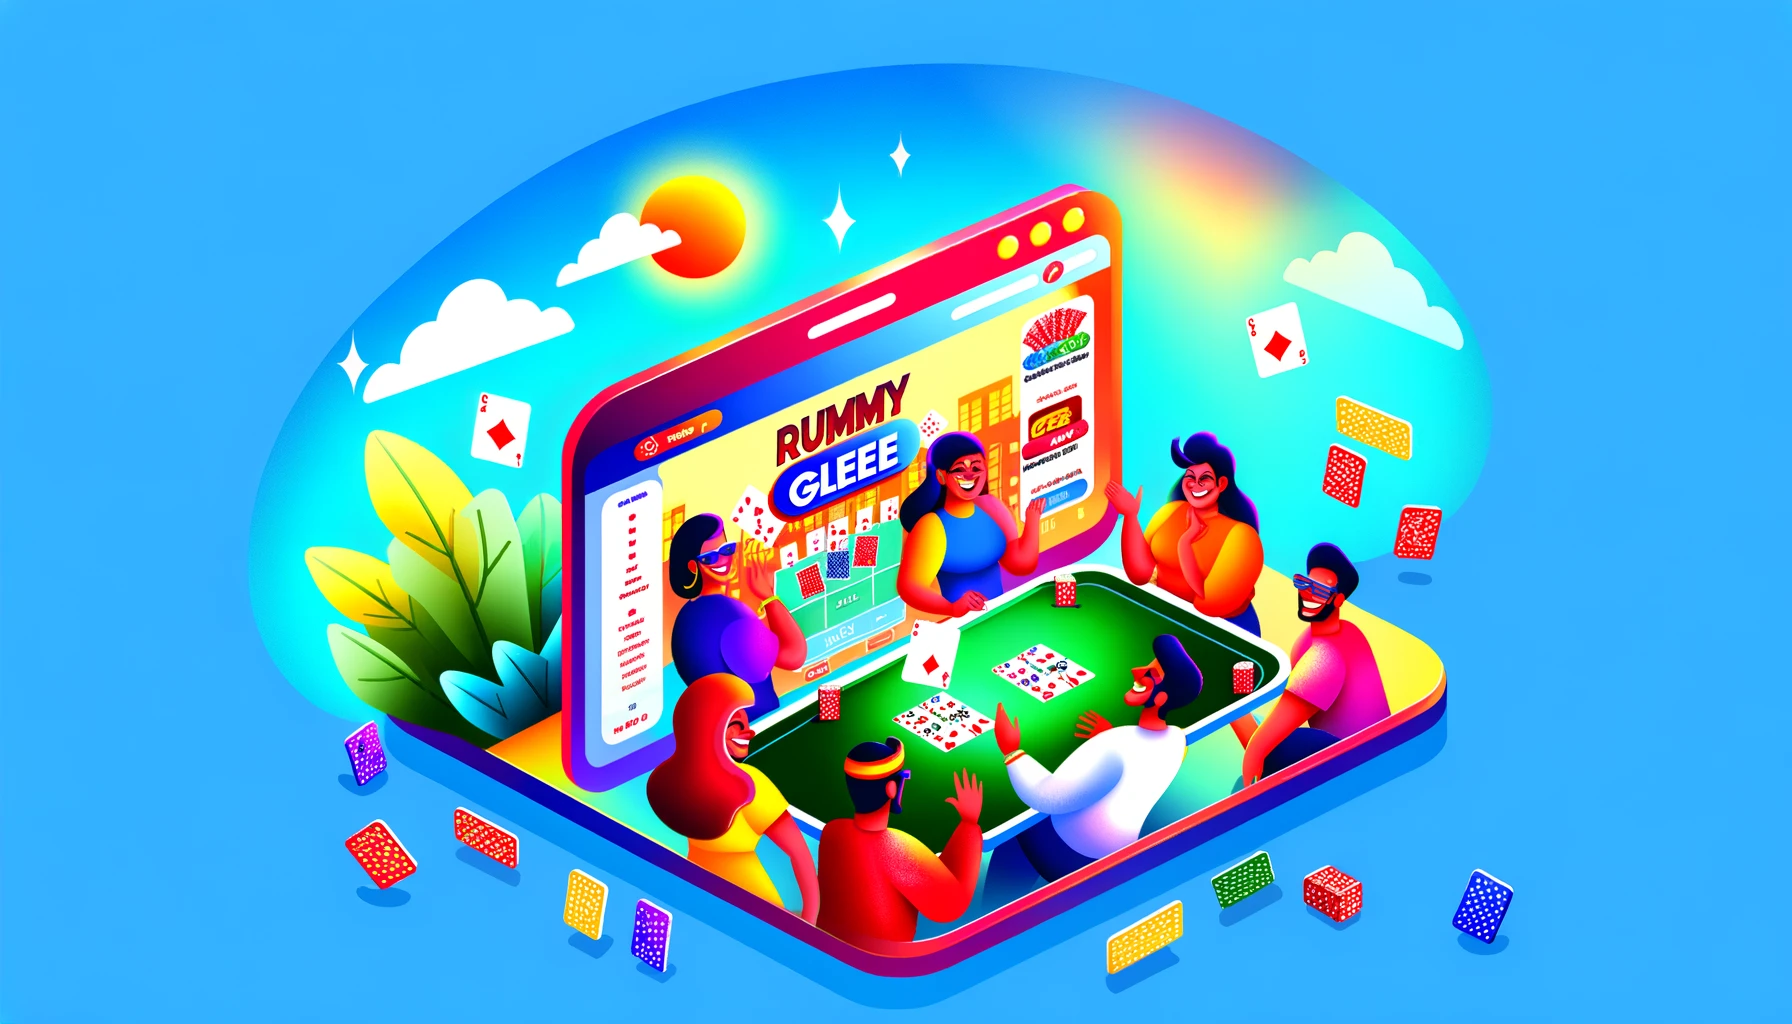 DALL·E 2024-02-21 14.10.34 - Create a vibrant and engaging promotional image for 'Rummy Glee', with the dimensions of 512x288 pixels. The image should highlight the fun and excite